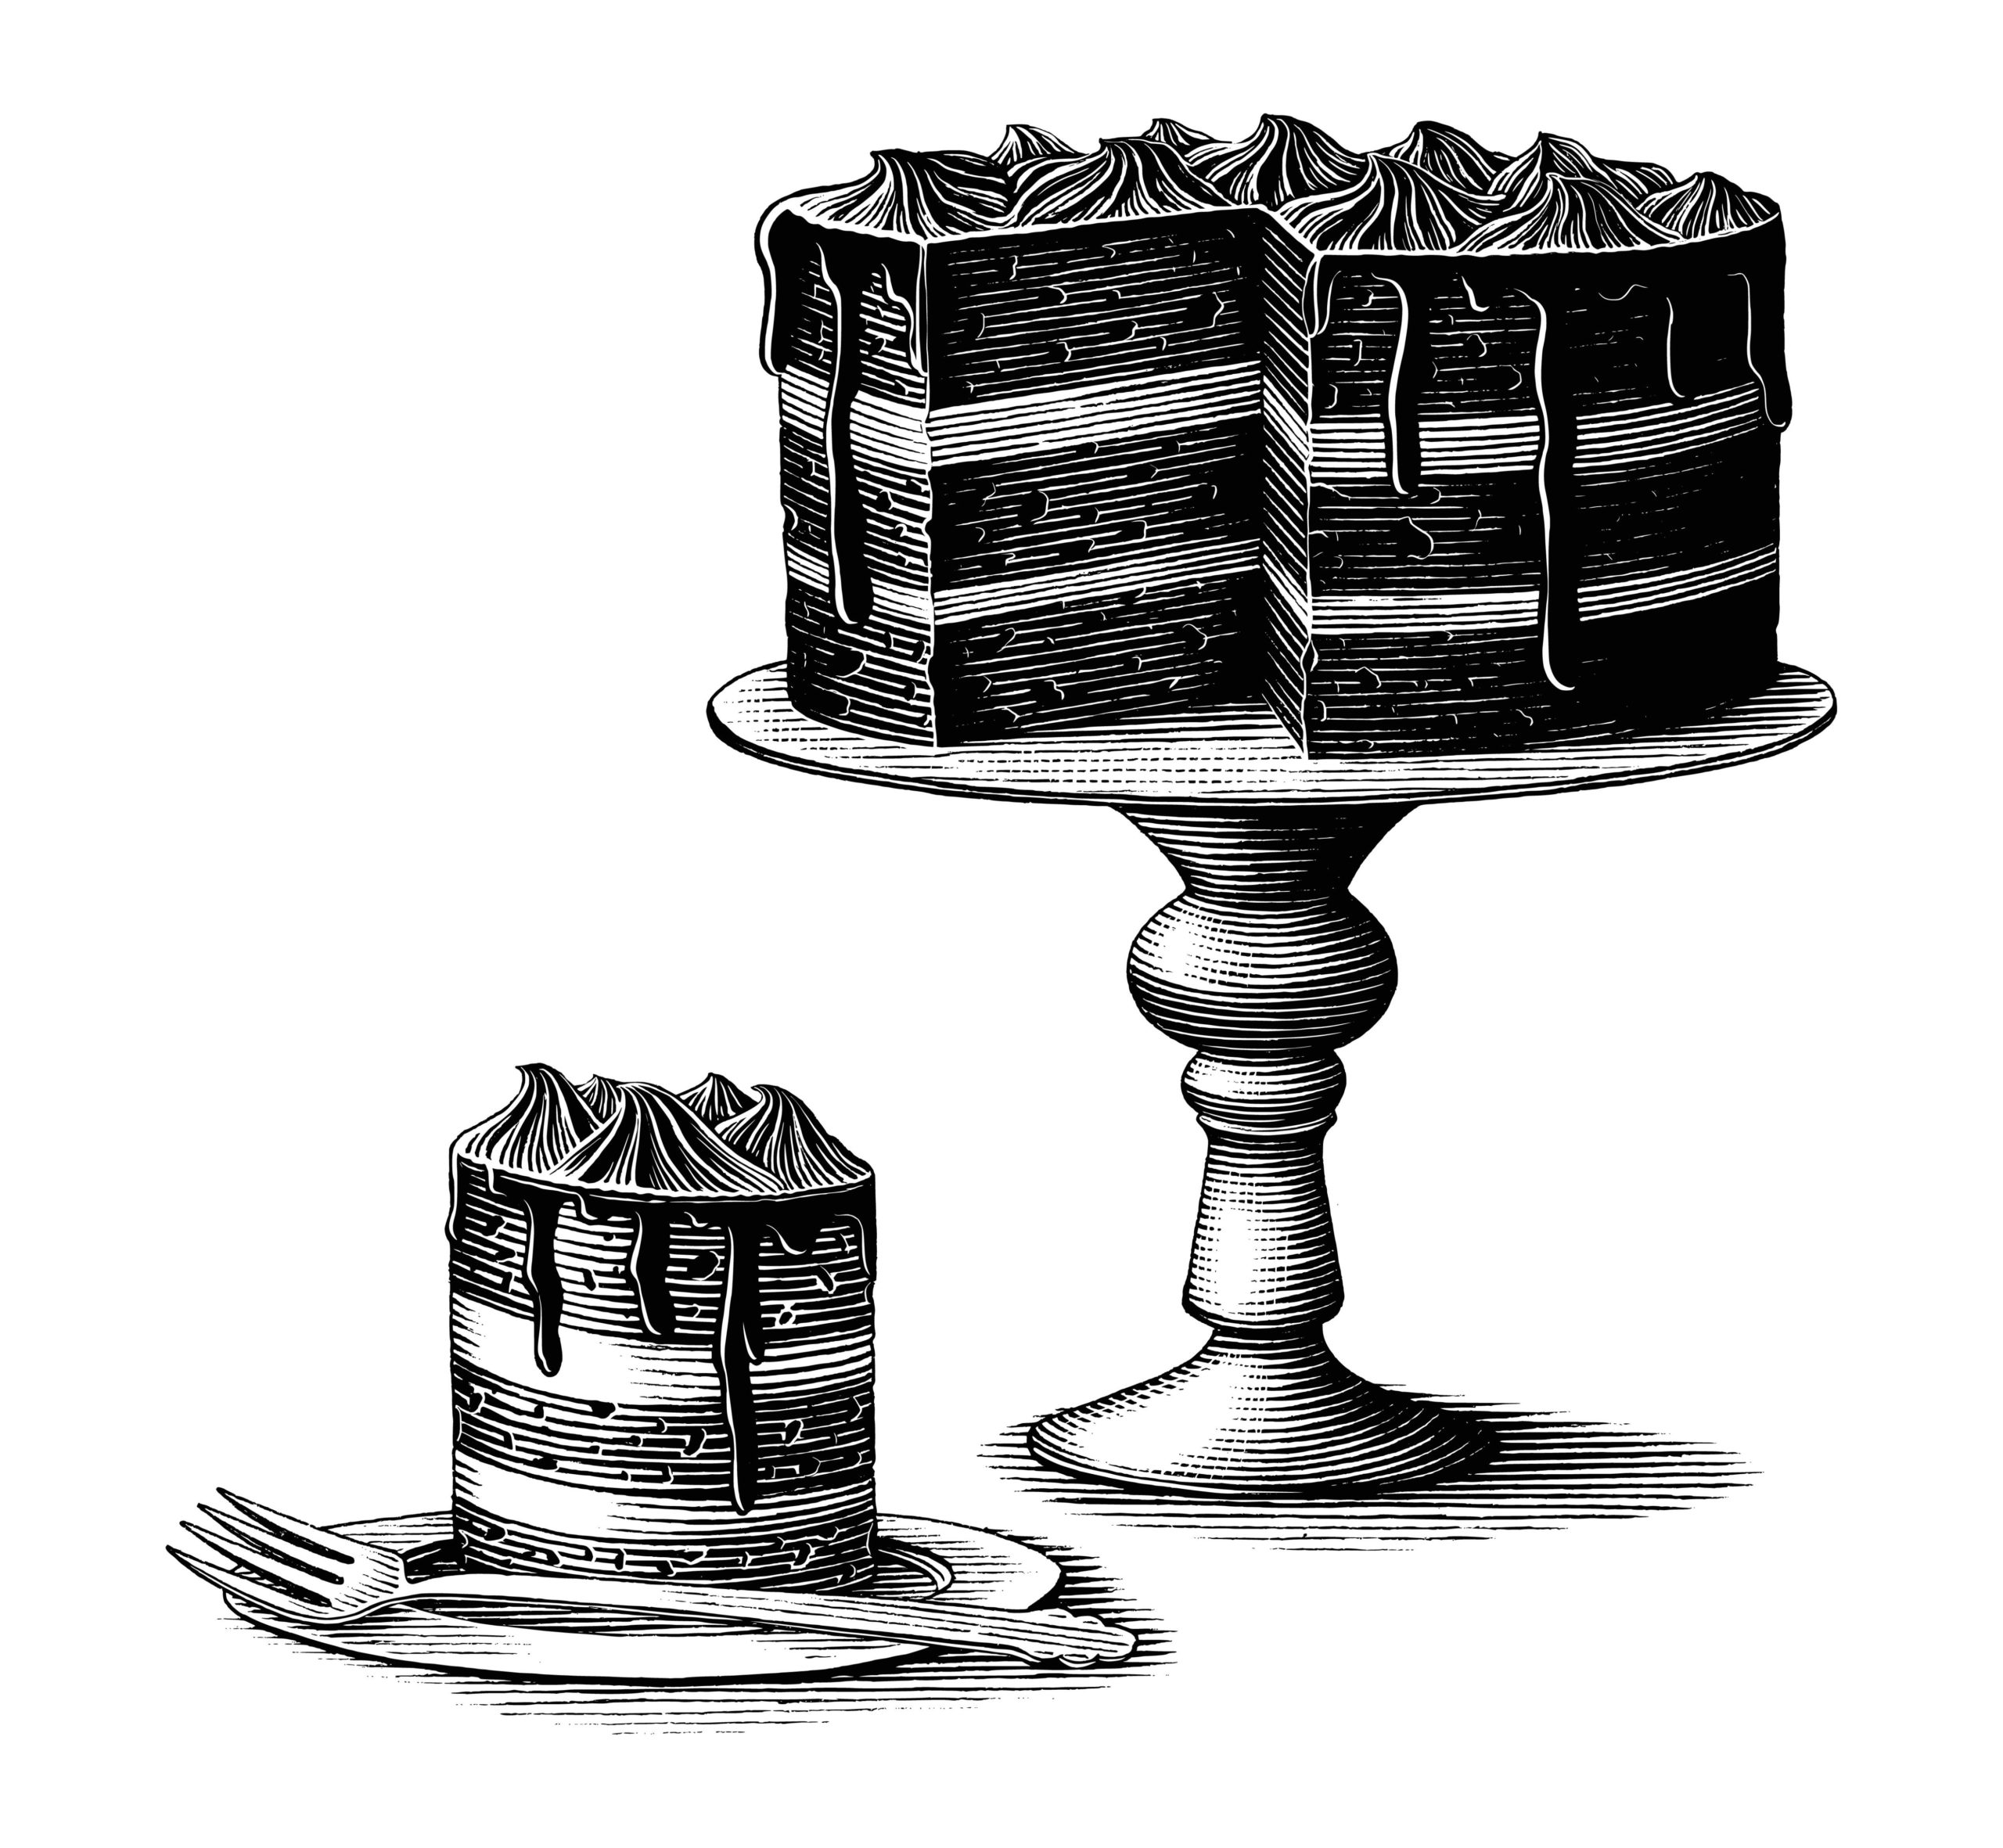 2FMKYF8 Brownie cake hand drawn vintage engraving style black and white clip art isolated on white background